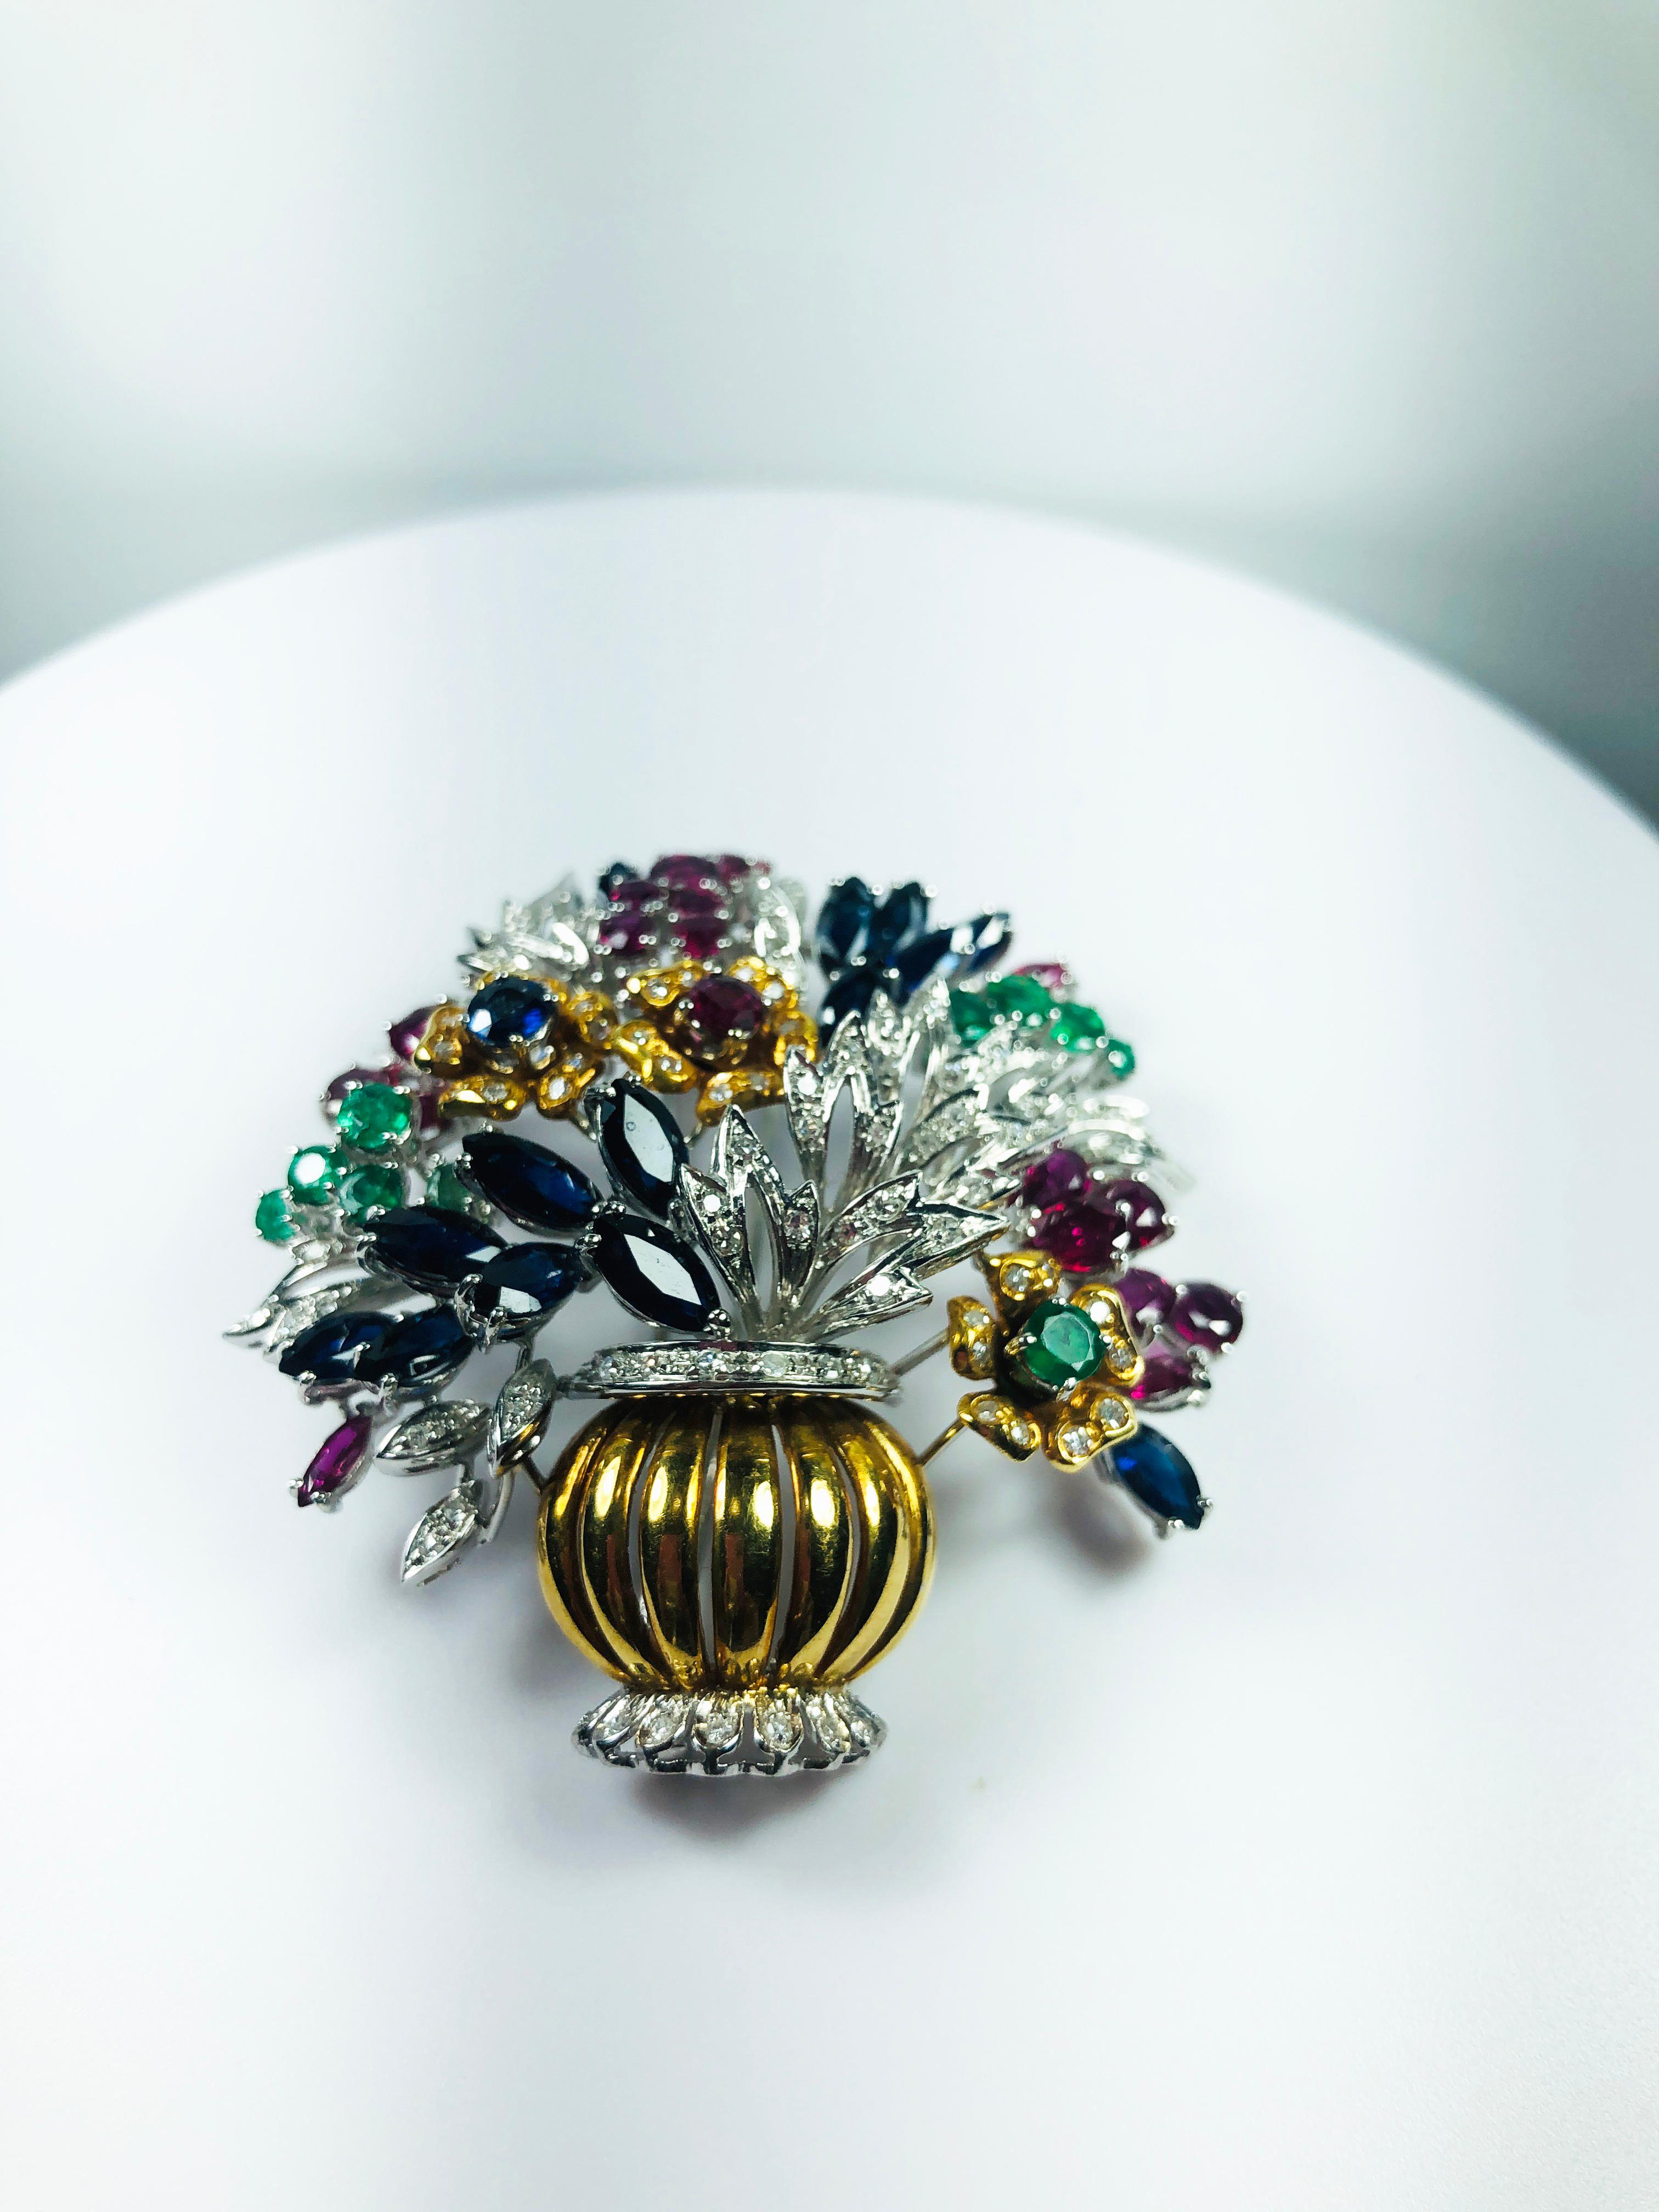 Bouquet of flower Brooche in 18k yellow and white gold, with diamonds,  emerald, ruby and sapphire composing a beautiful flowers

MATERIALS
◘ Weight 29,6 grams 
◘ Size 55cm /22inch. 

READY TO SHIP
*Shipment of this piece is not affected by